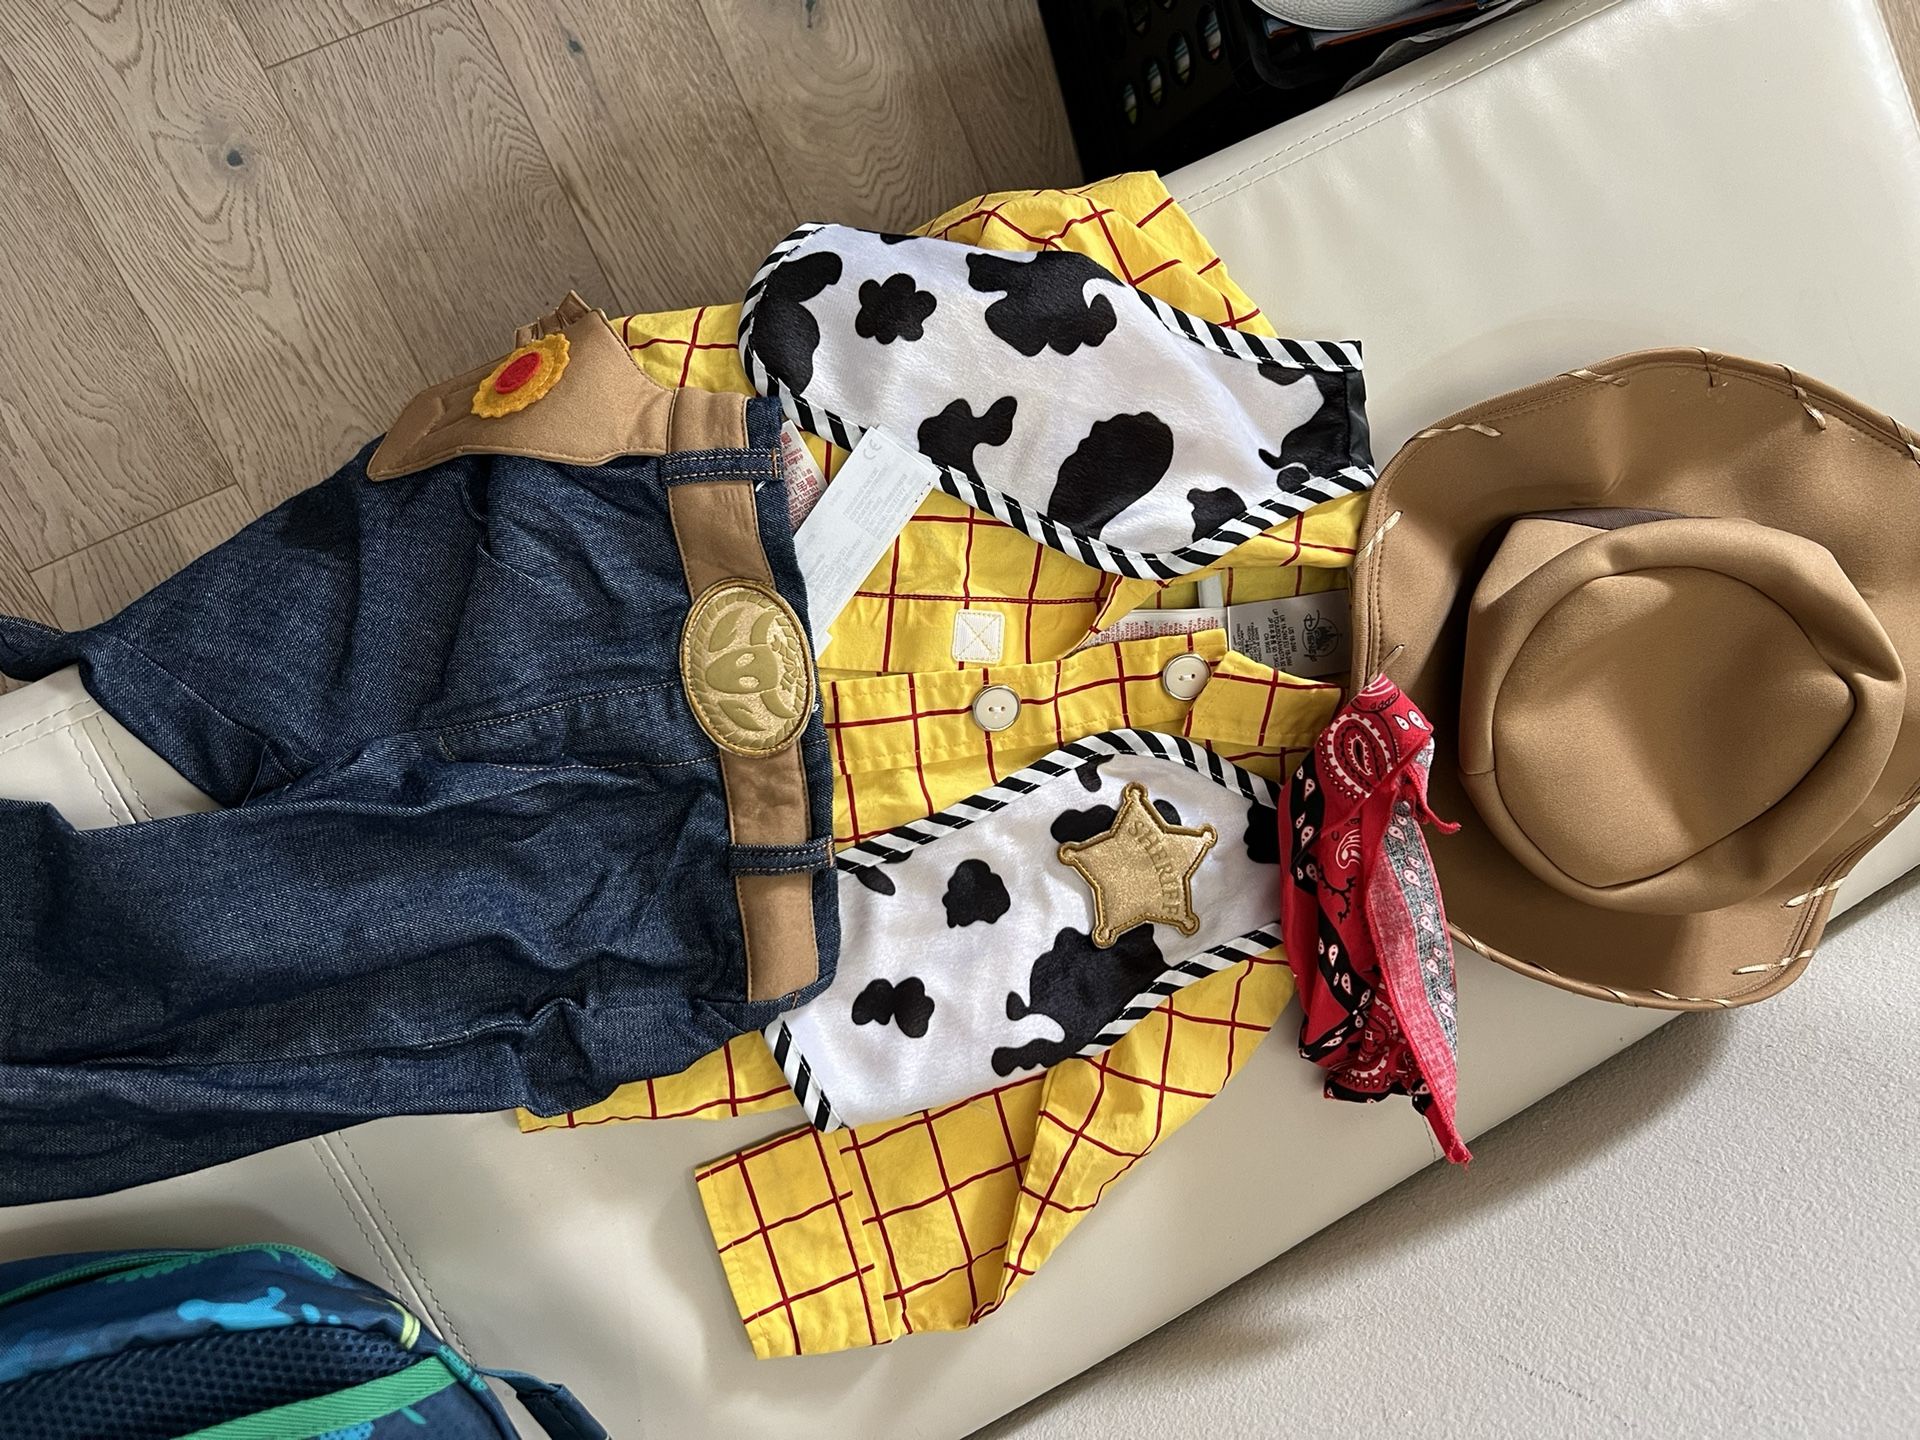 Woody Costume From Disney Store 18-24 Months